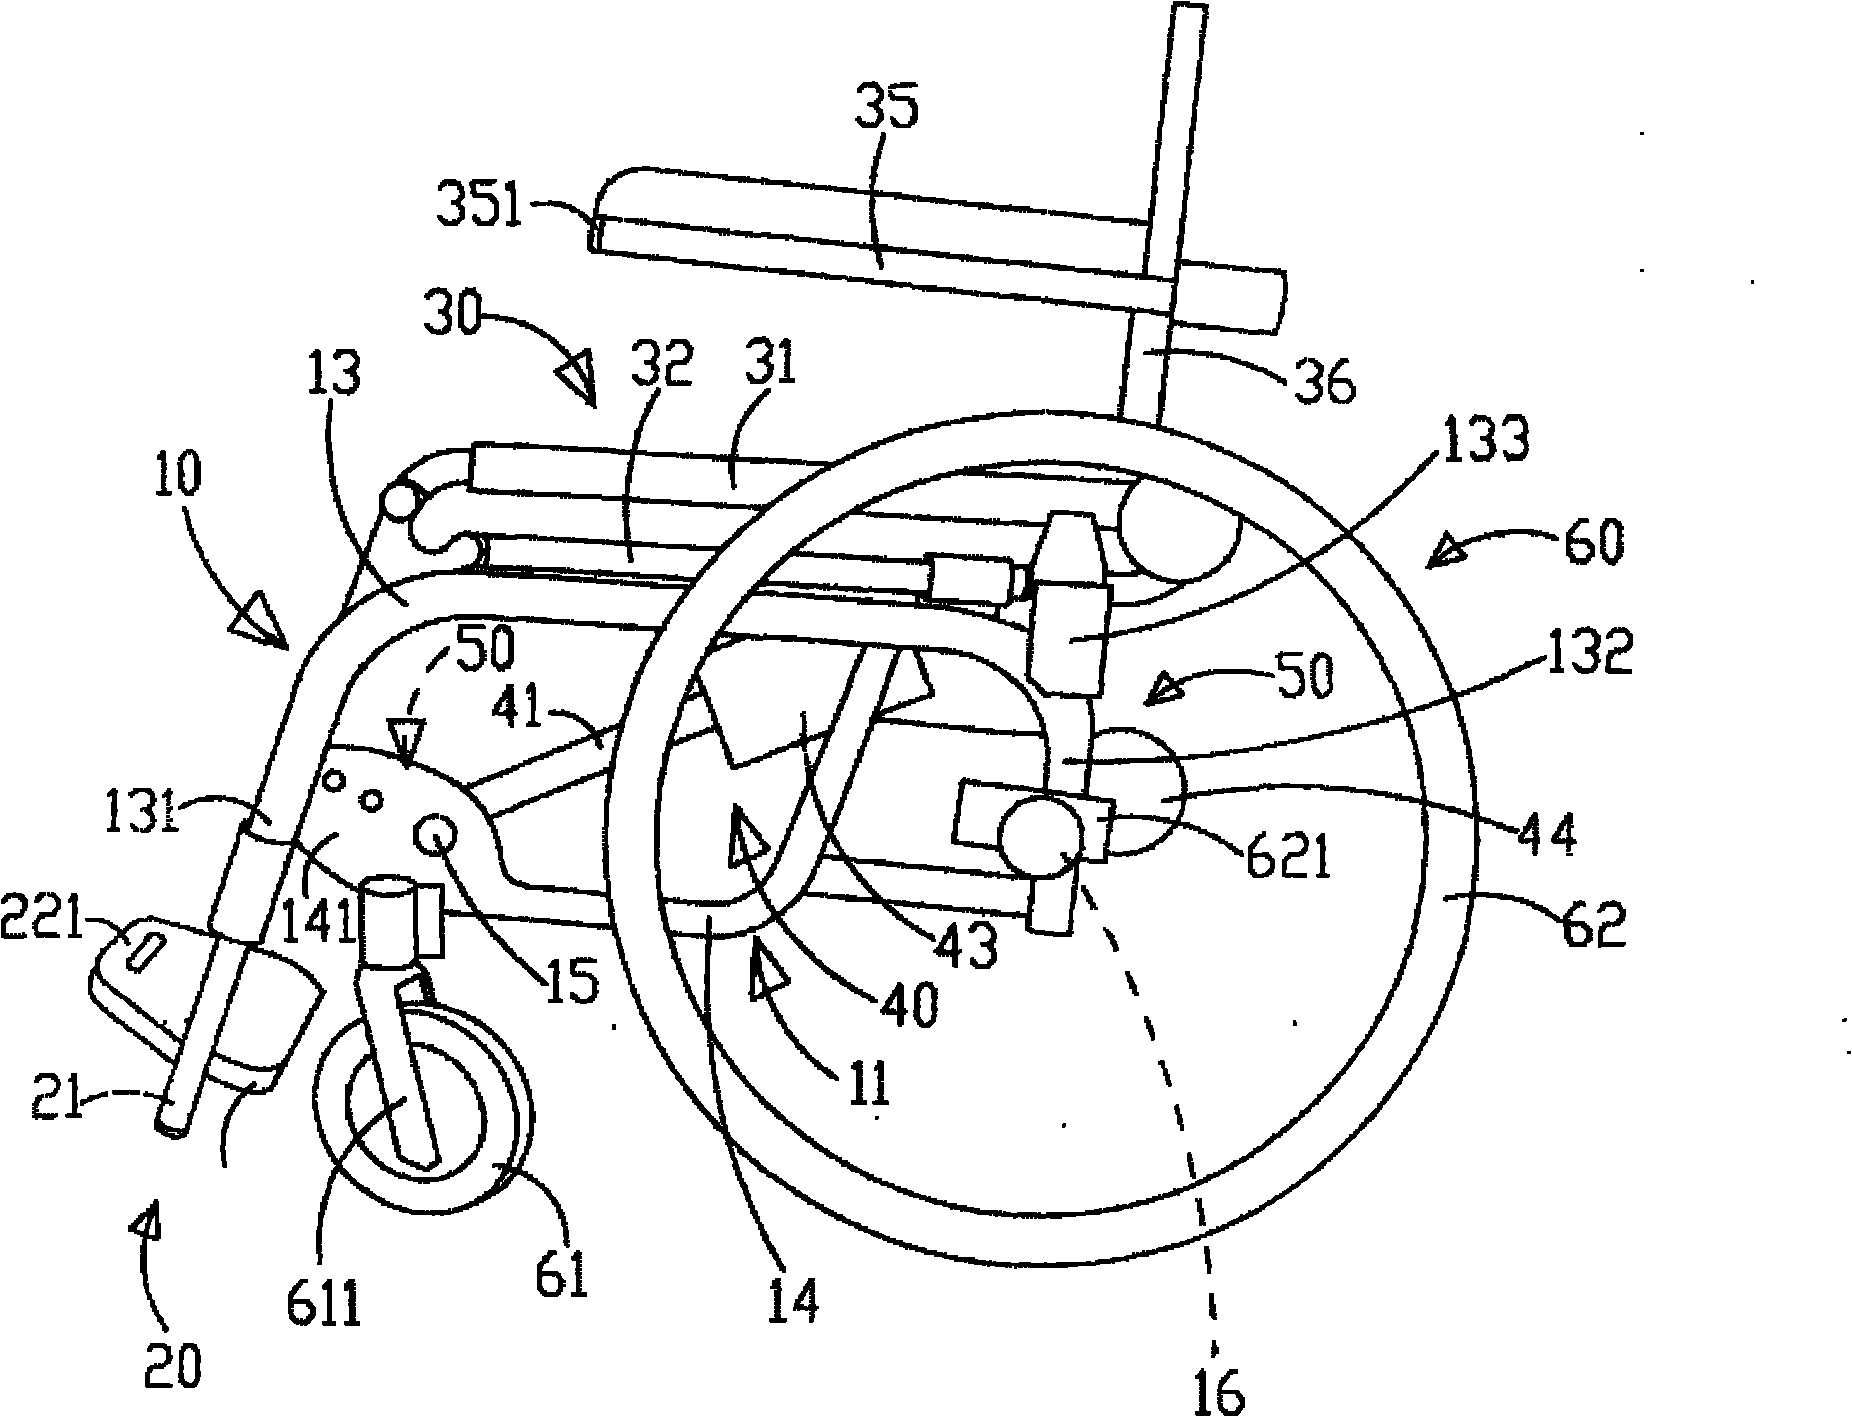 Wheelchair device with assistant function